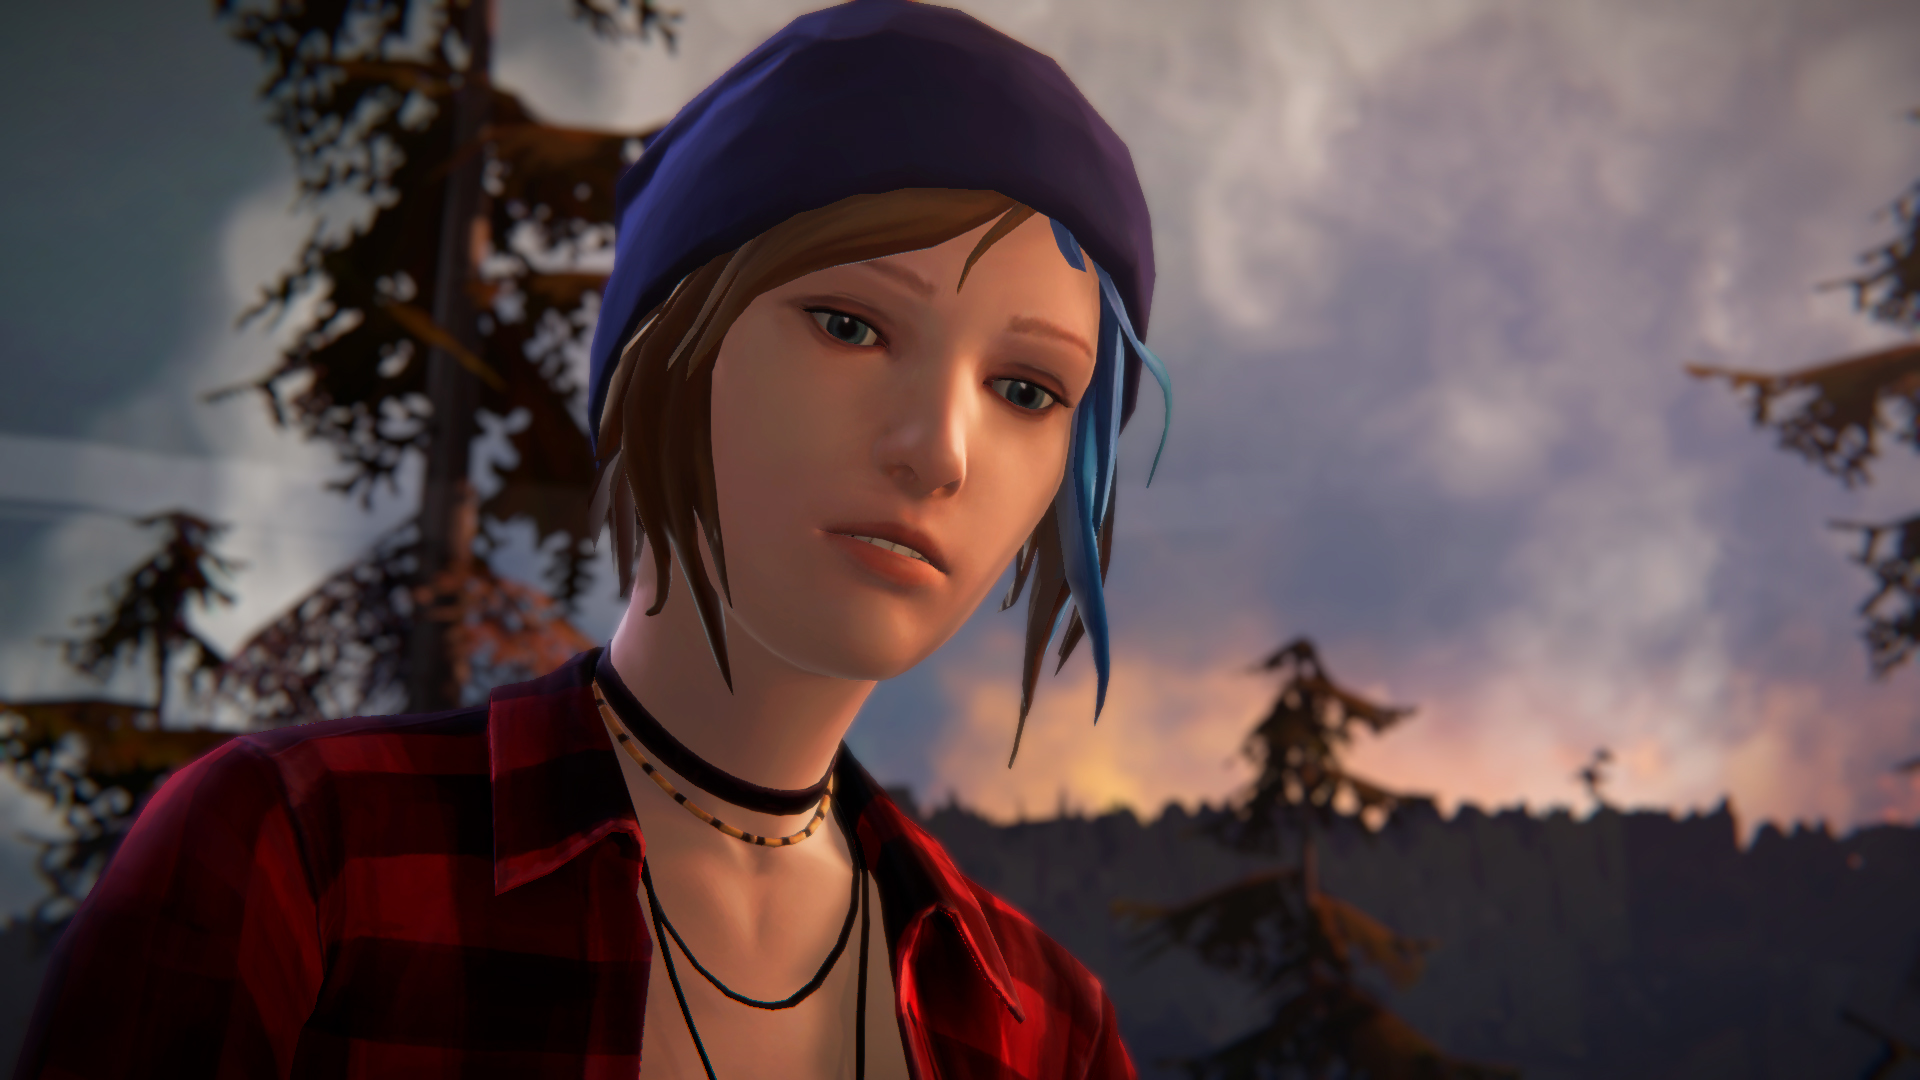 Life is Strange developer plans to release six games by end of 2025